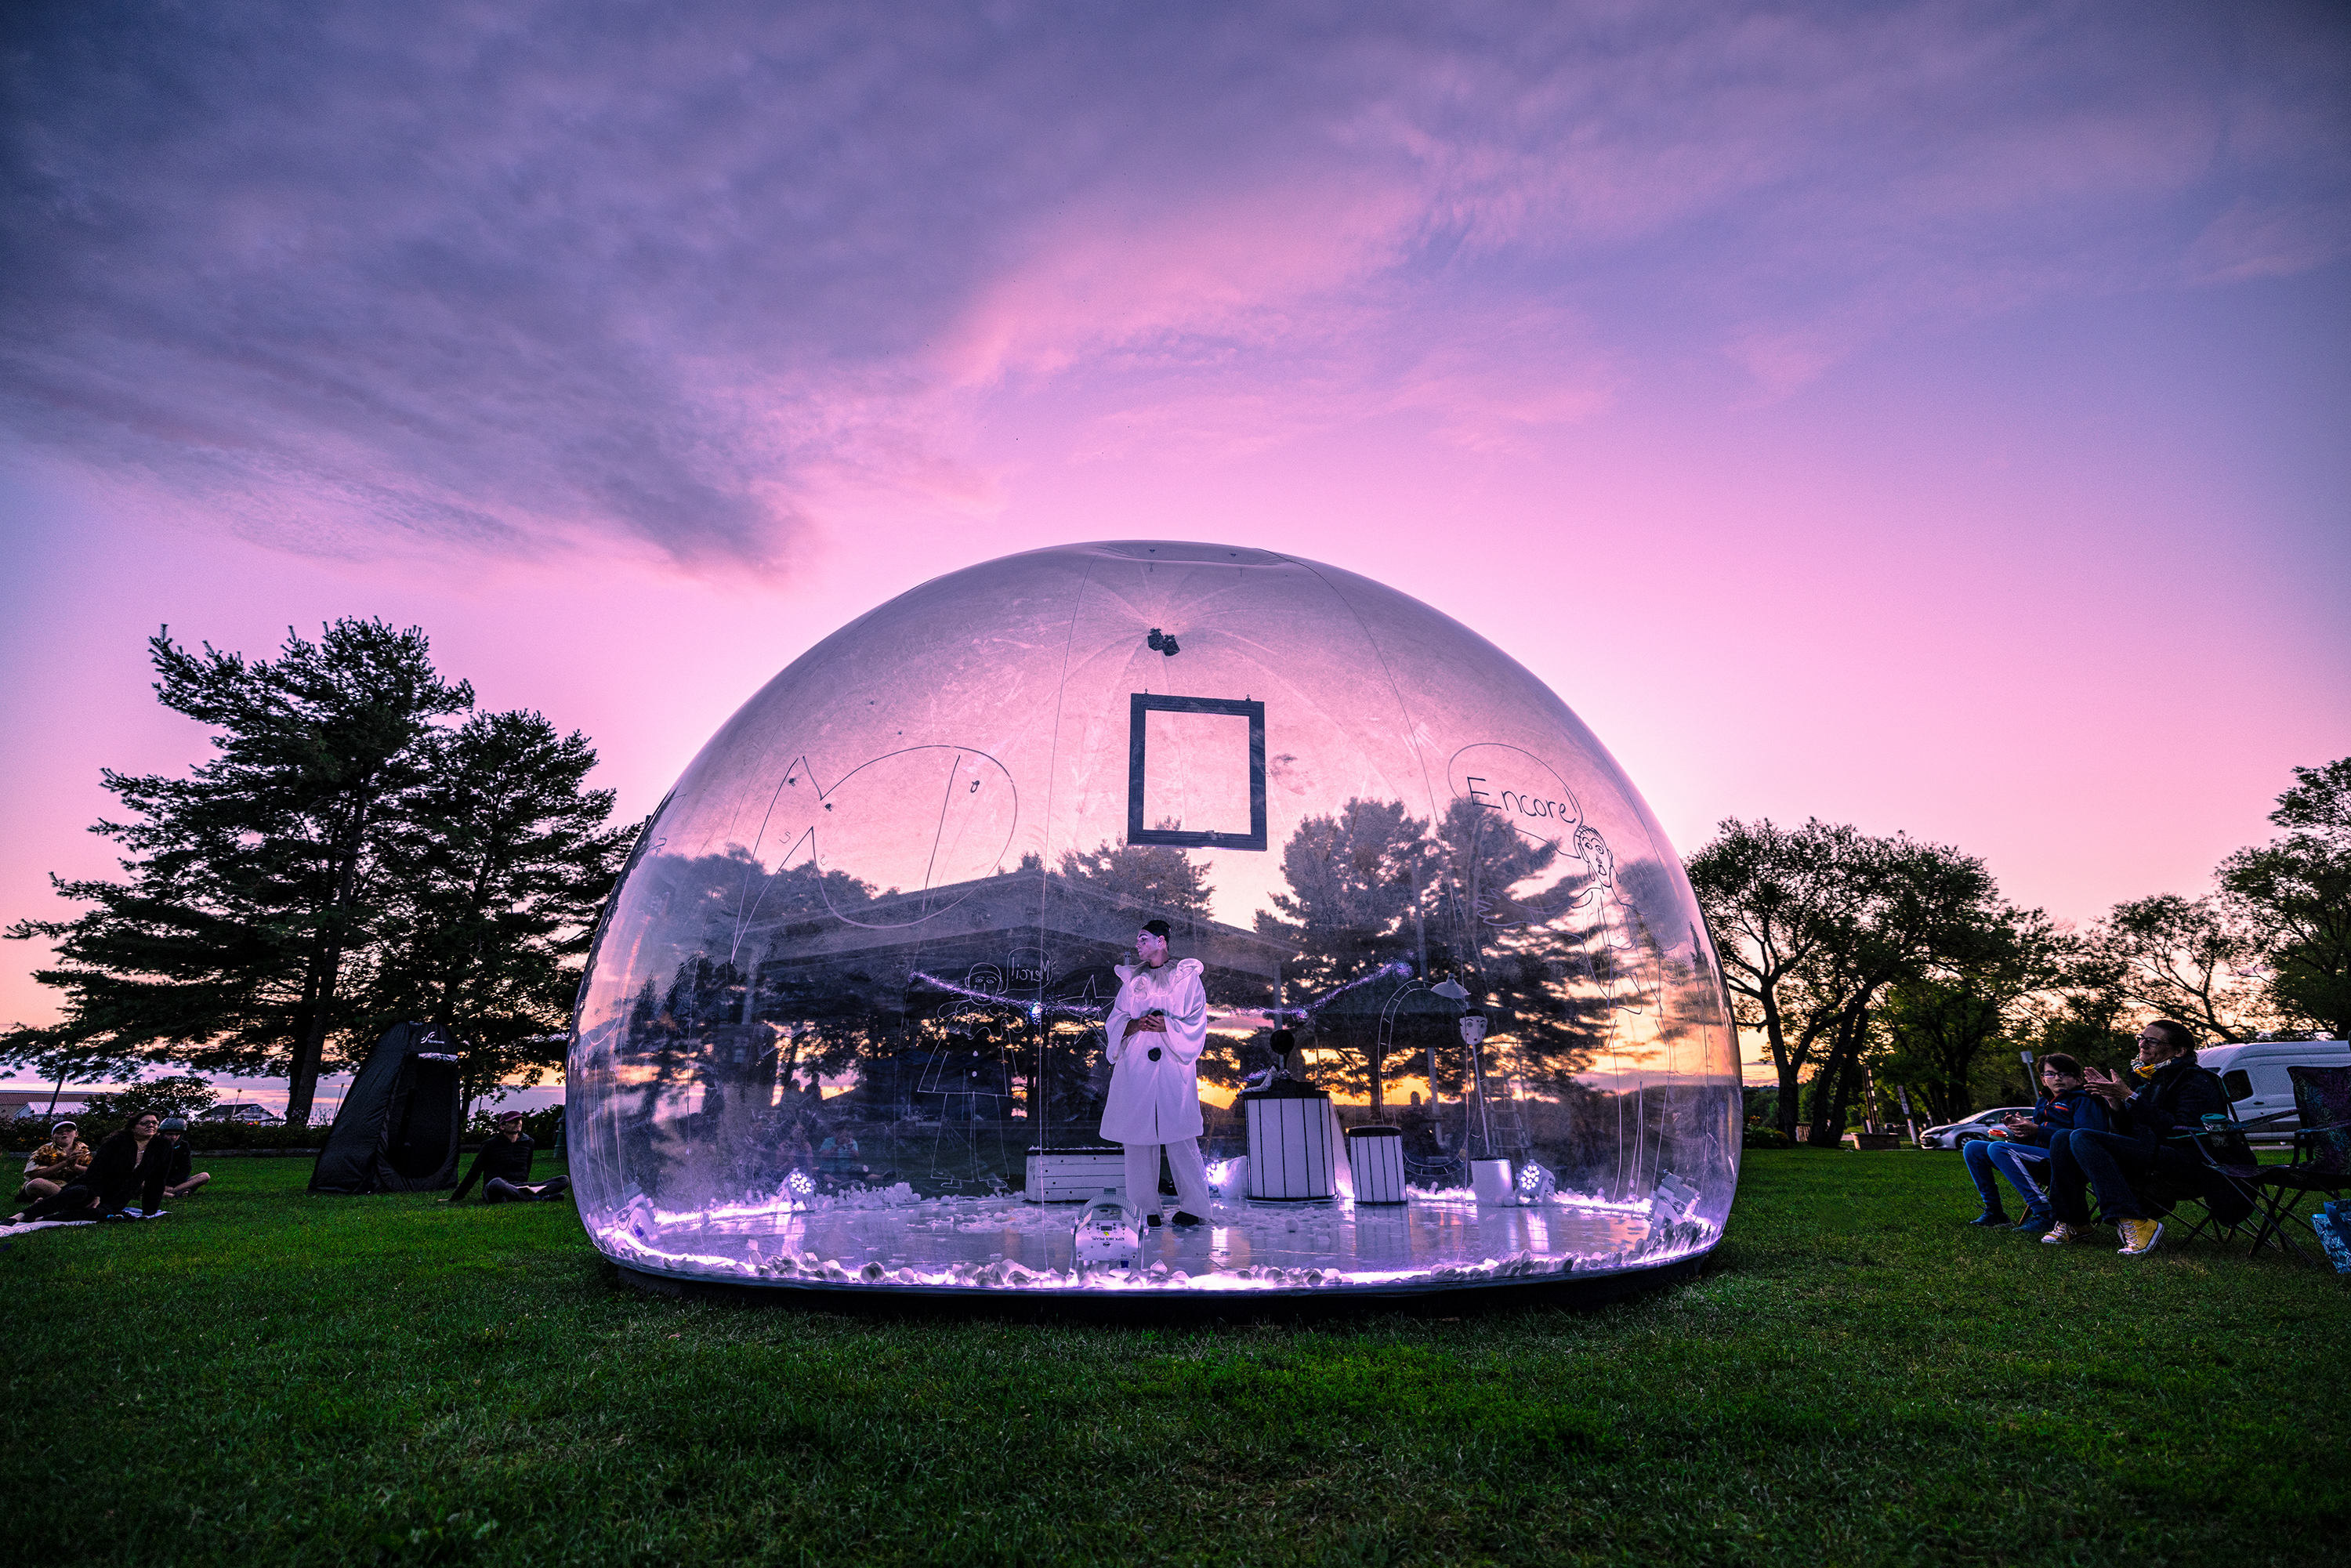 An artist performing in a clear geodome against a purple sunset.